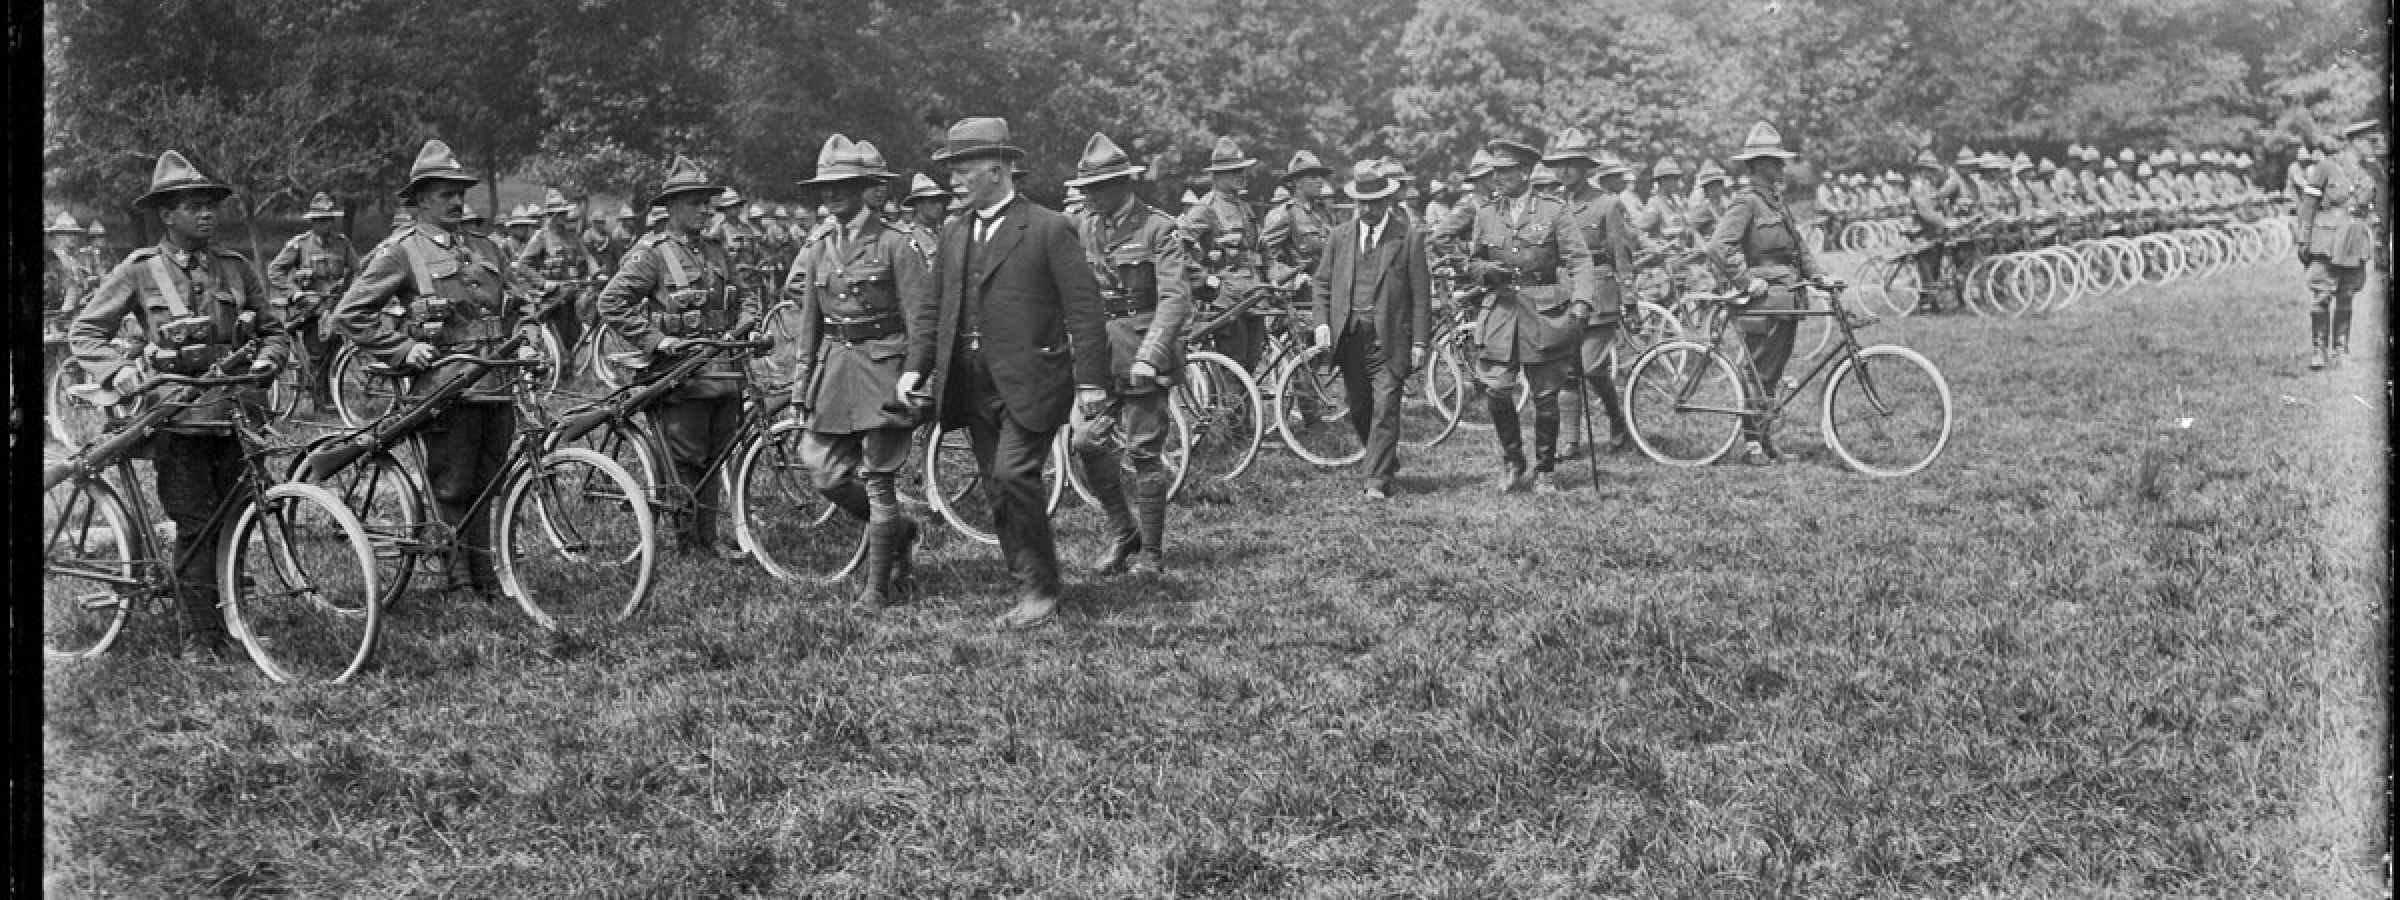 William Massey and Joseph Ward inspect the New Zealand Cyclist Battalion in France, 3 July 1917.